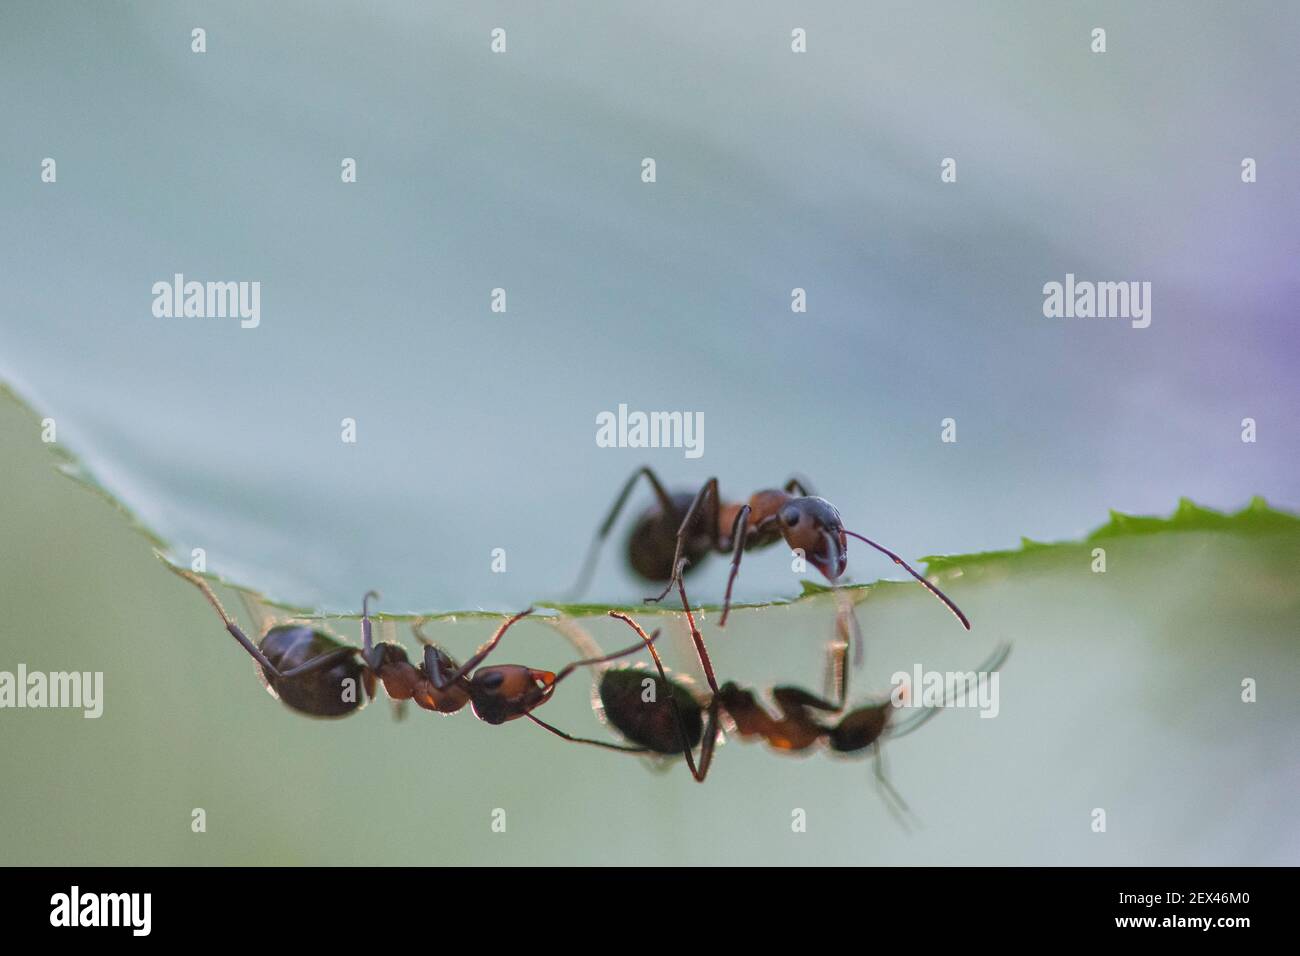 European Red Wood Ant (Formica polyctena) on a leaf, Lorraine, France Stock Photo